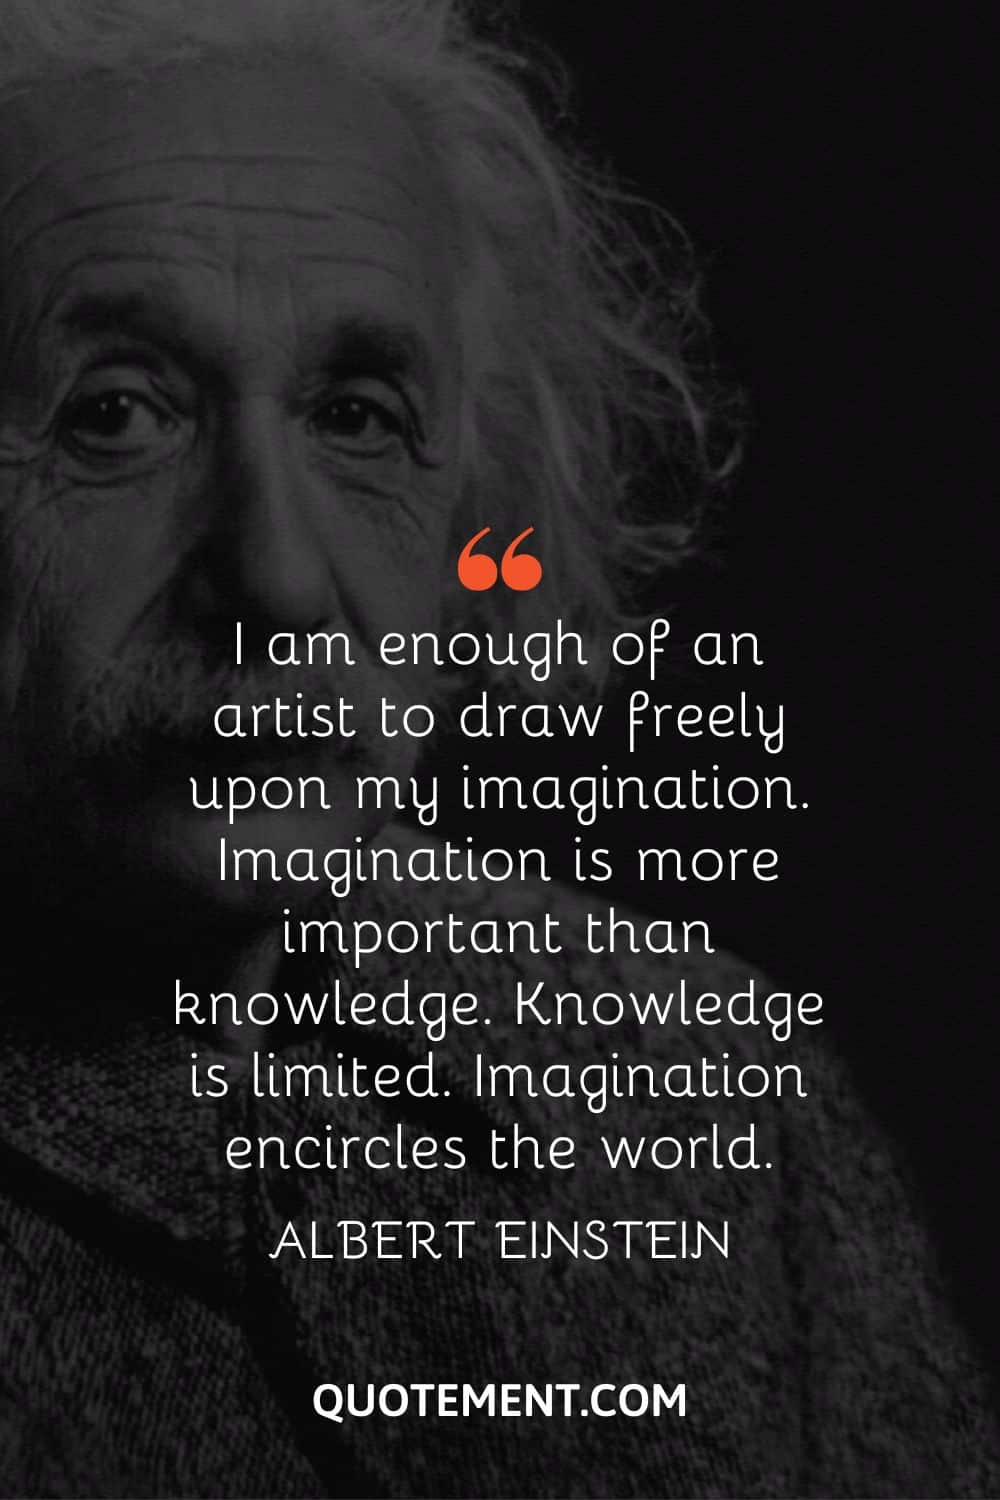 I am enough of an artist to draw freely upon my imagination